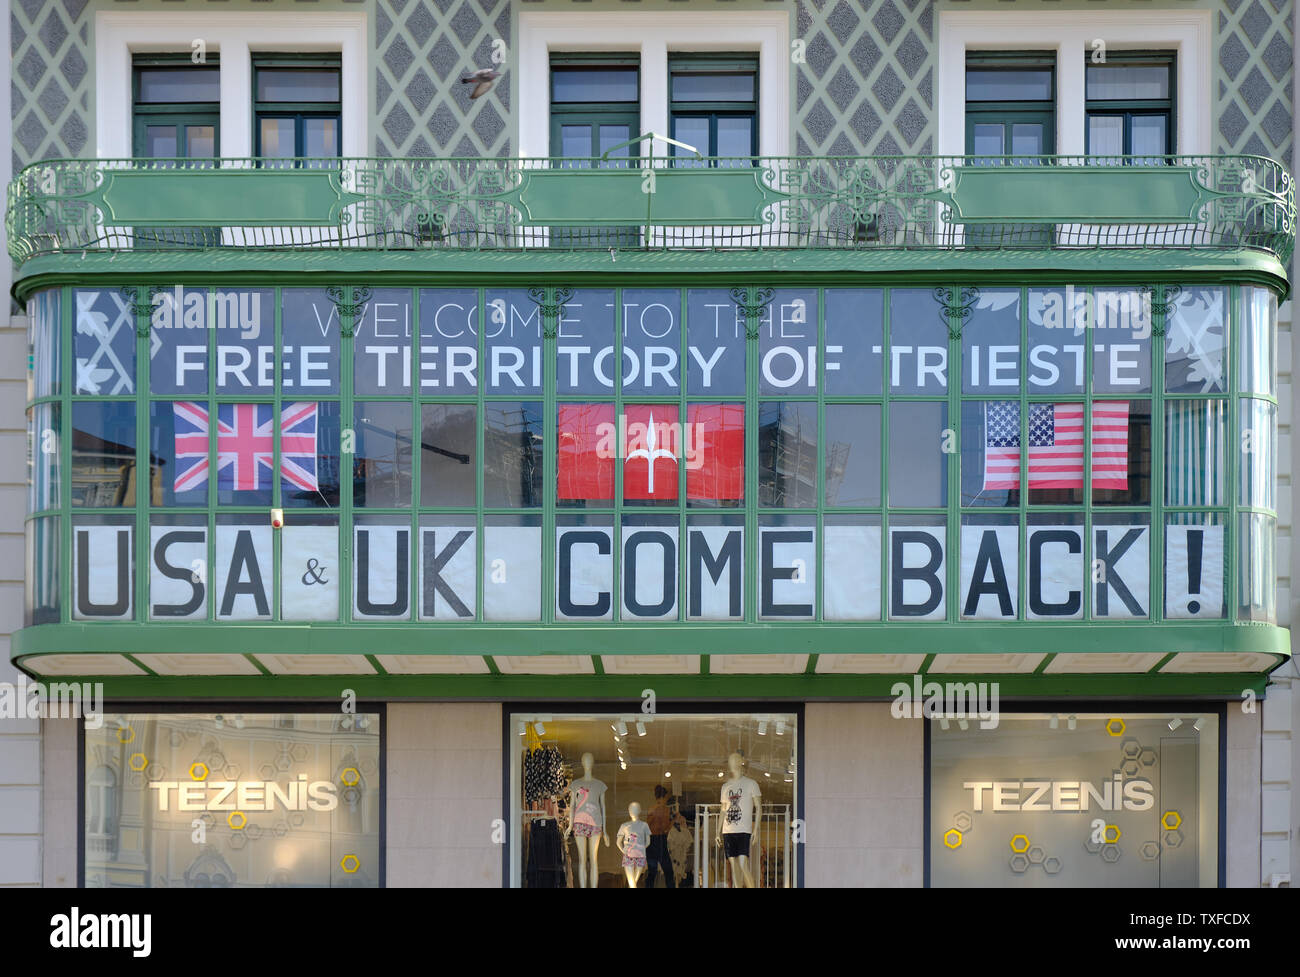 Banner in Window proclaiming 'Welcome to the Free Territory of Trieste', 'USA & UK come back!' . Trieste, Italy 2019 Stock Photo